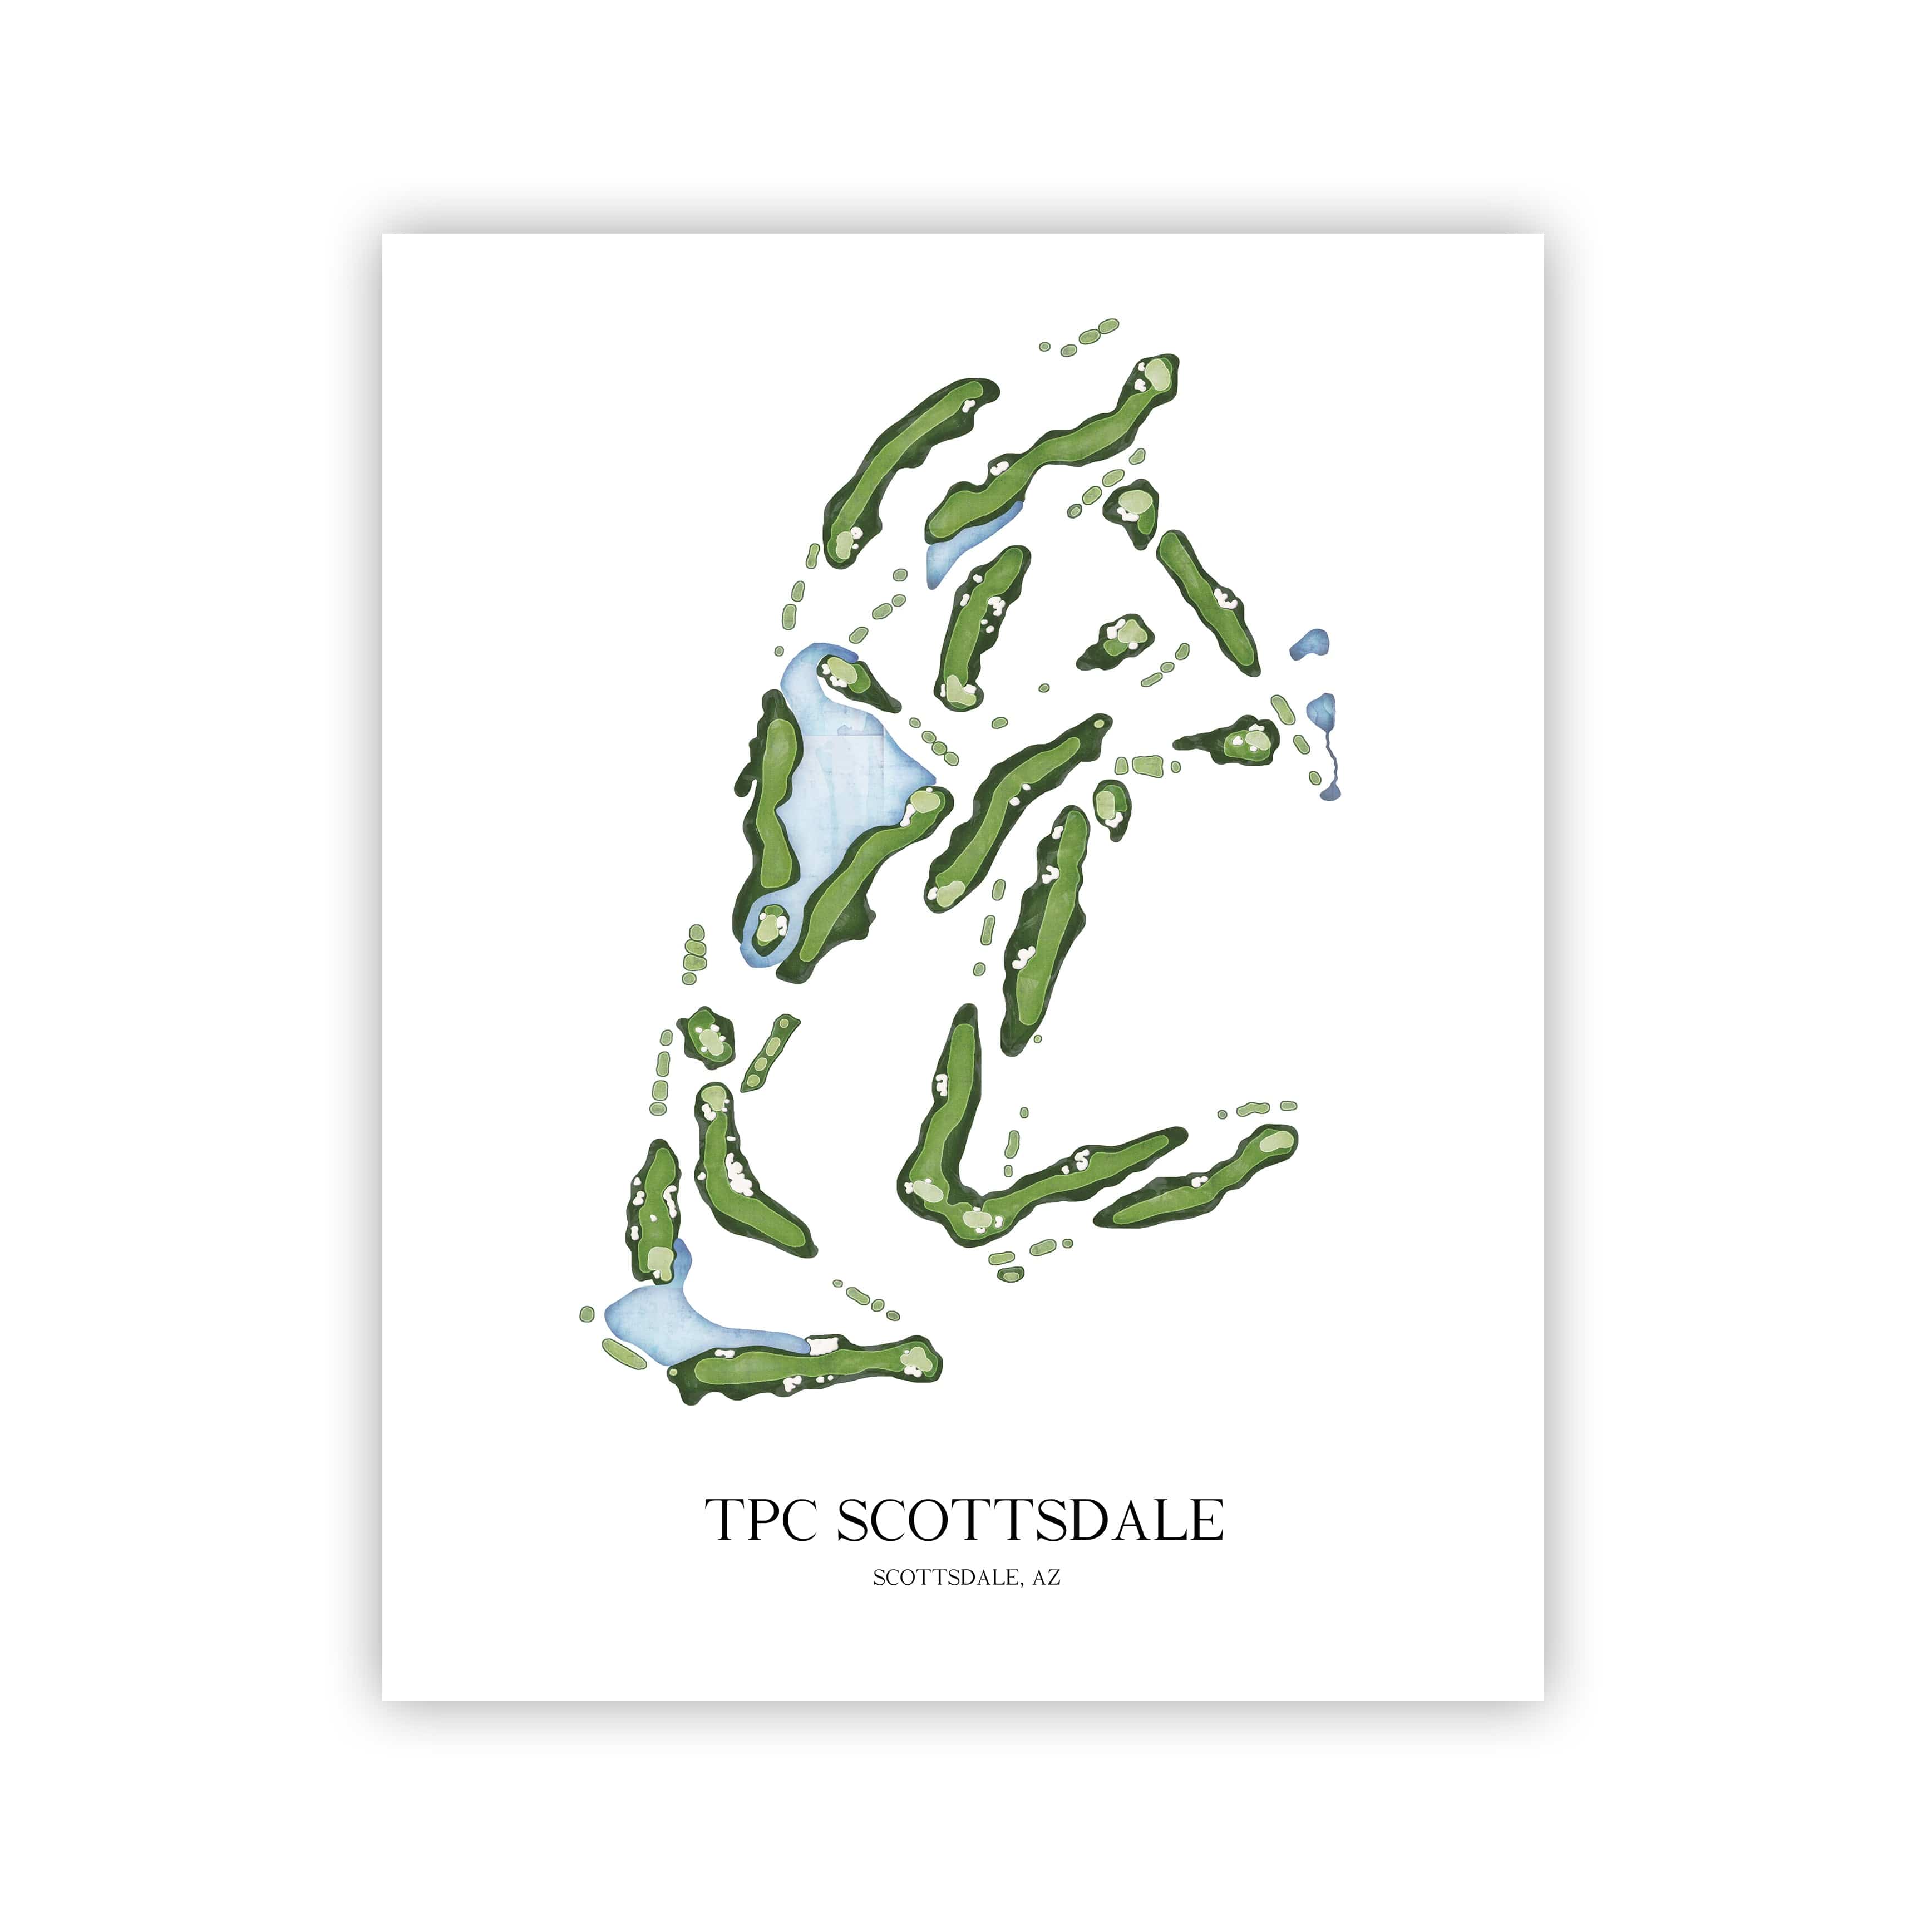 The 19th Hole Golf Shop - Golf Course Prints -  8" x 10" / No Frame TPC Scottsdale Golf Course Map